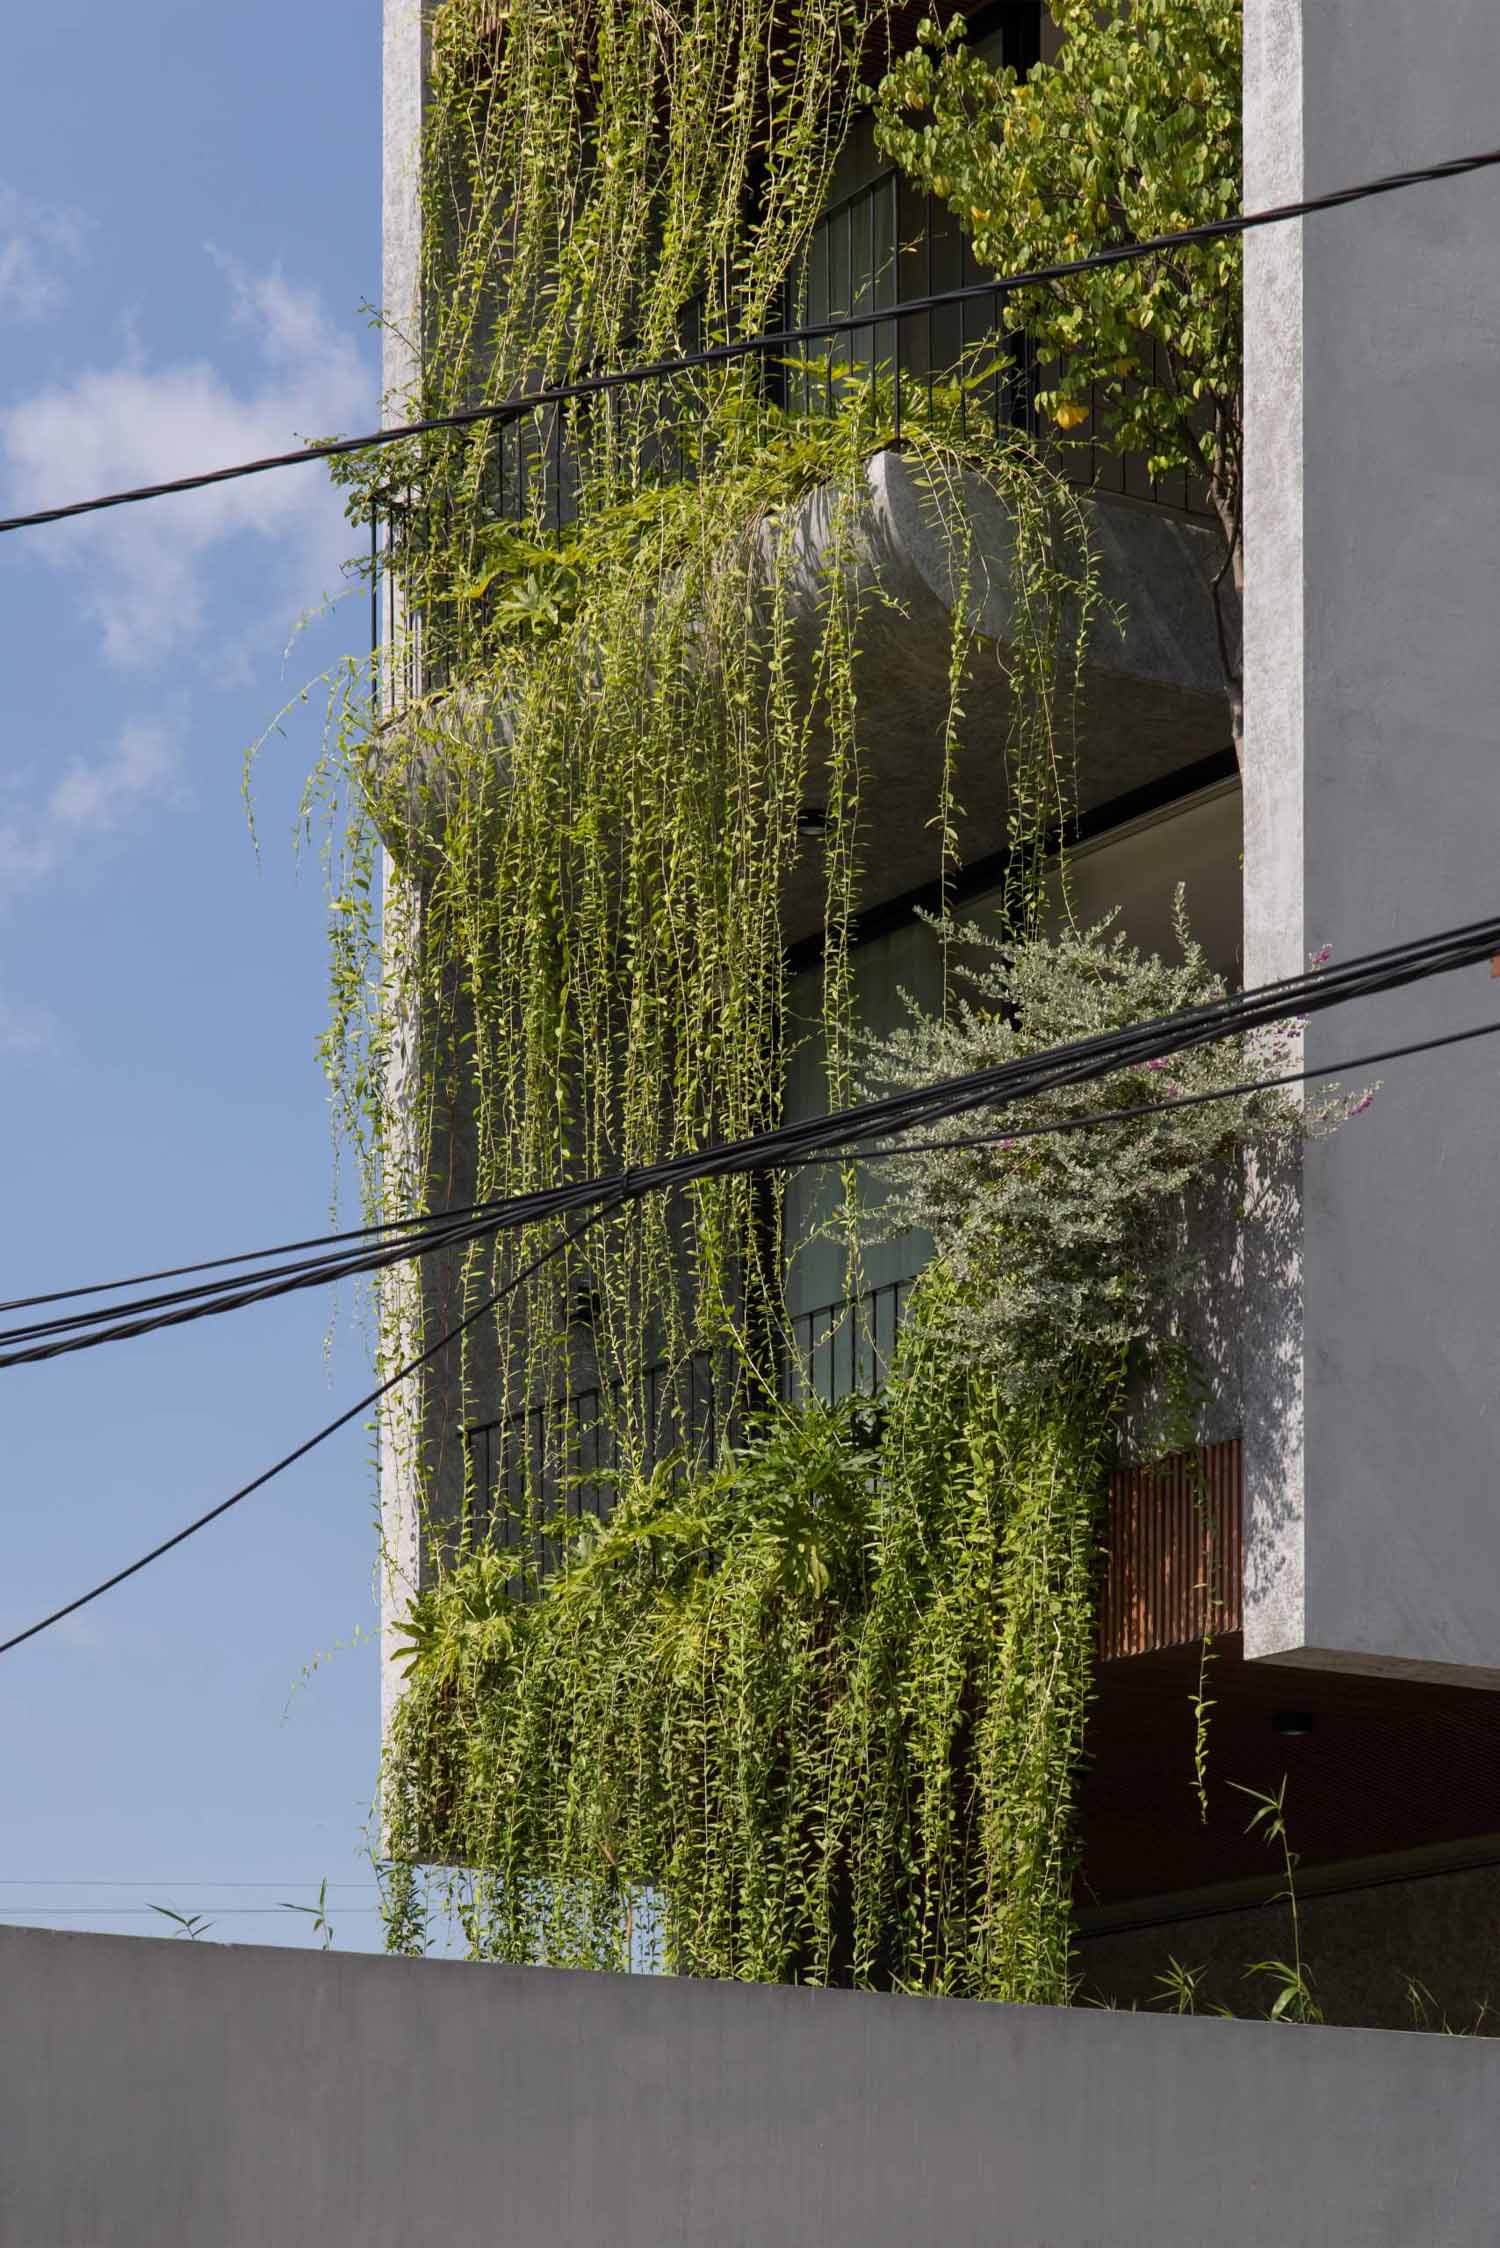 To integrate nature into the design of the home, Chrysanthemum curtains have been planted on the balconies, helping to soften the exterior and solve the problem of heat radiation, as well as the hot dry wind. The plants also assist in shielding the interior from the rain.